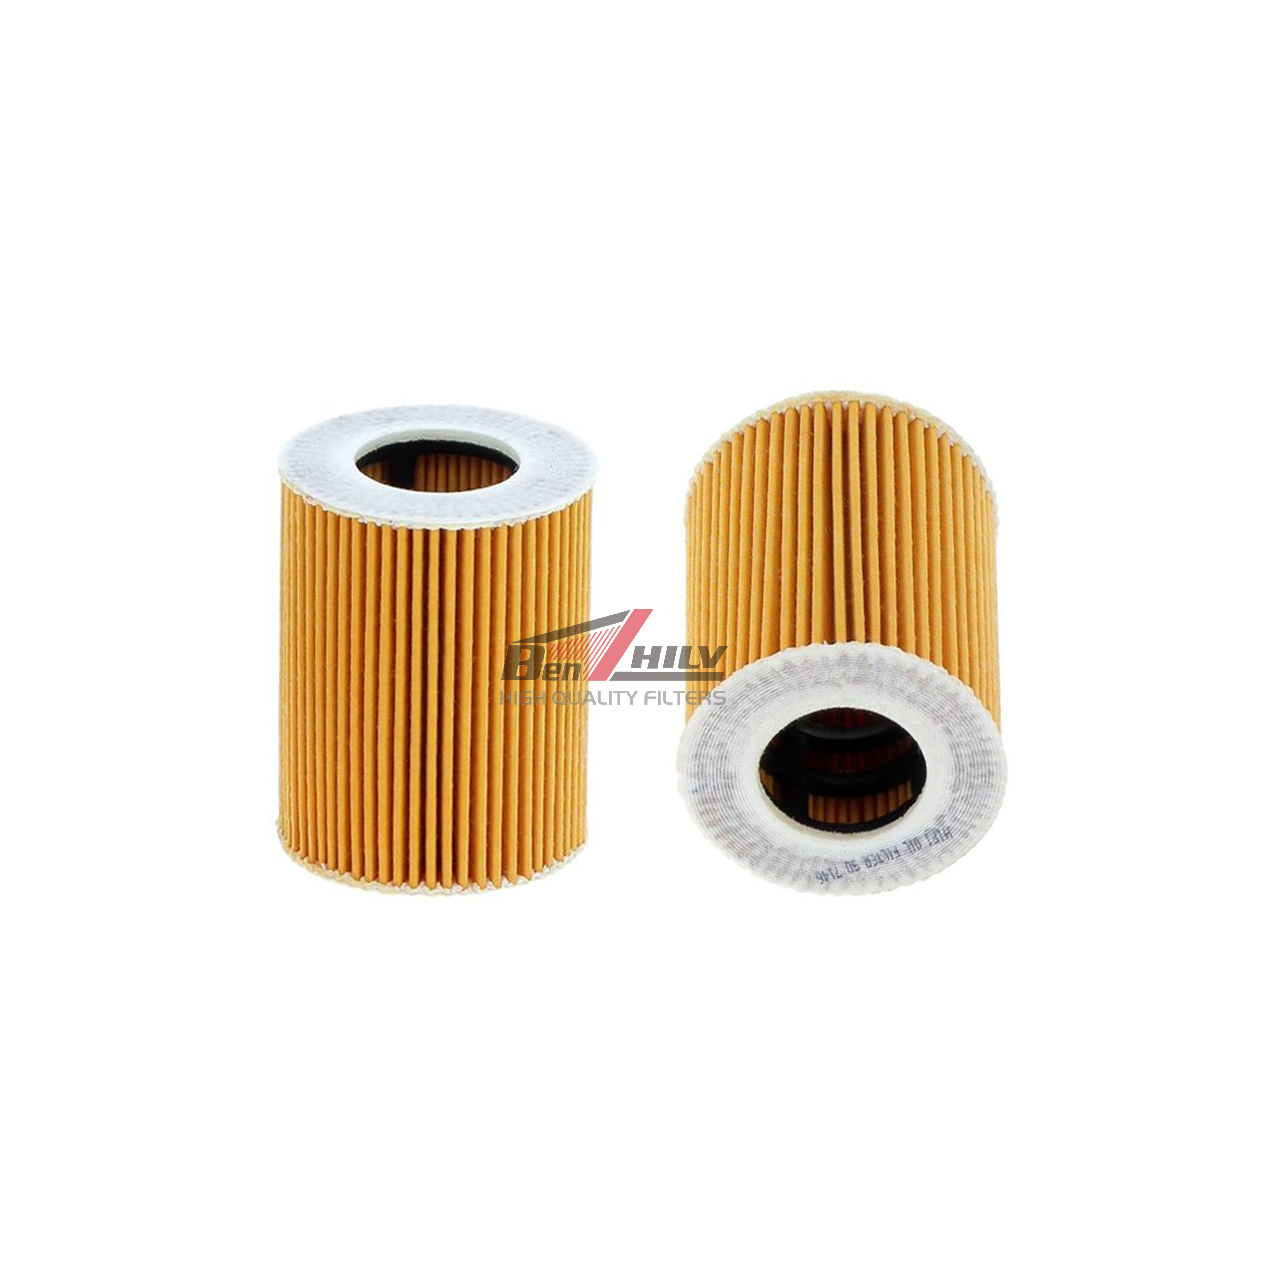 OX369D Lubricate the oil filter element